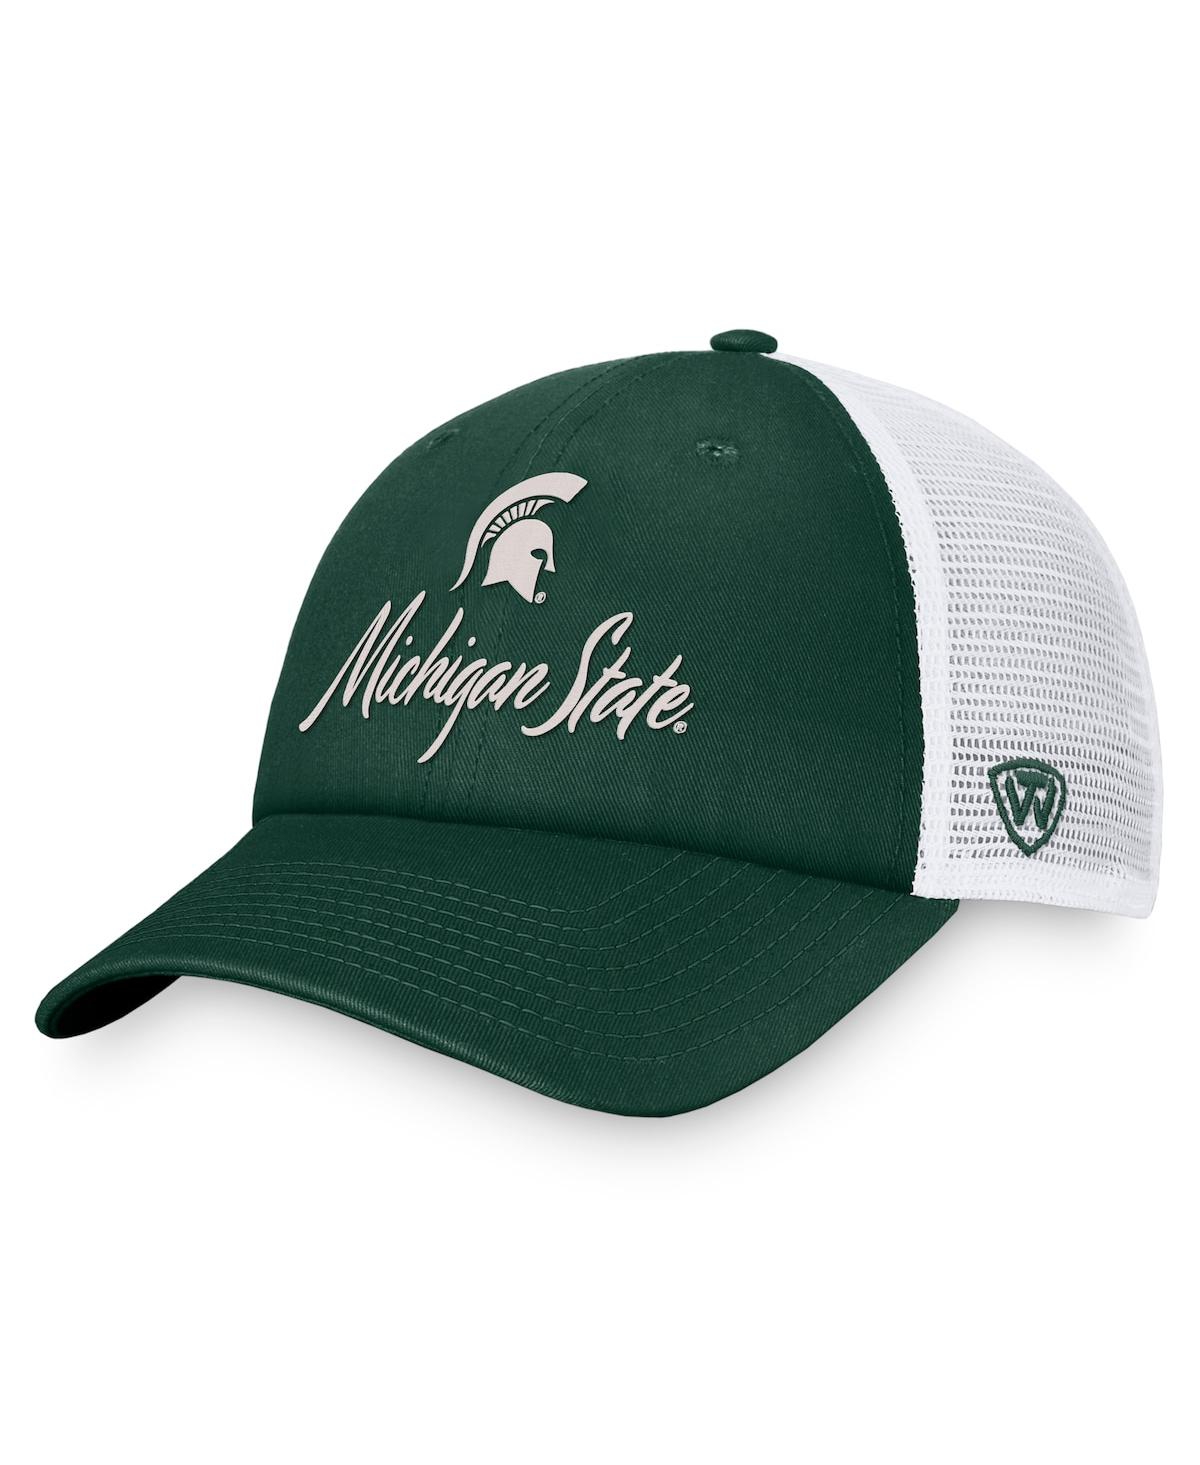 Women's Top of the World Green, White Michigan State Spartans Charm Trucker Adjustable Hat - Green, White